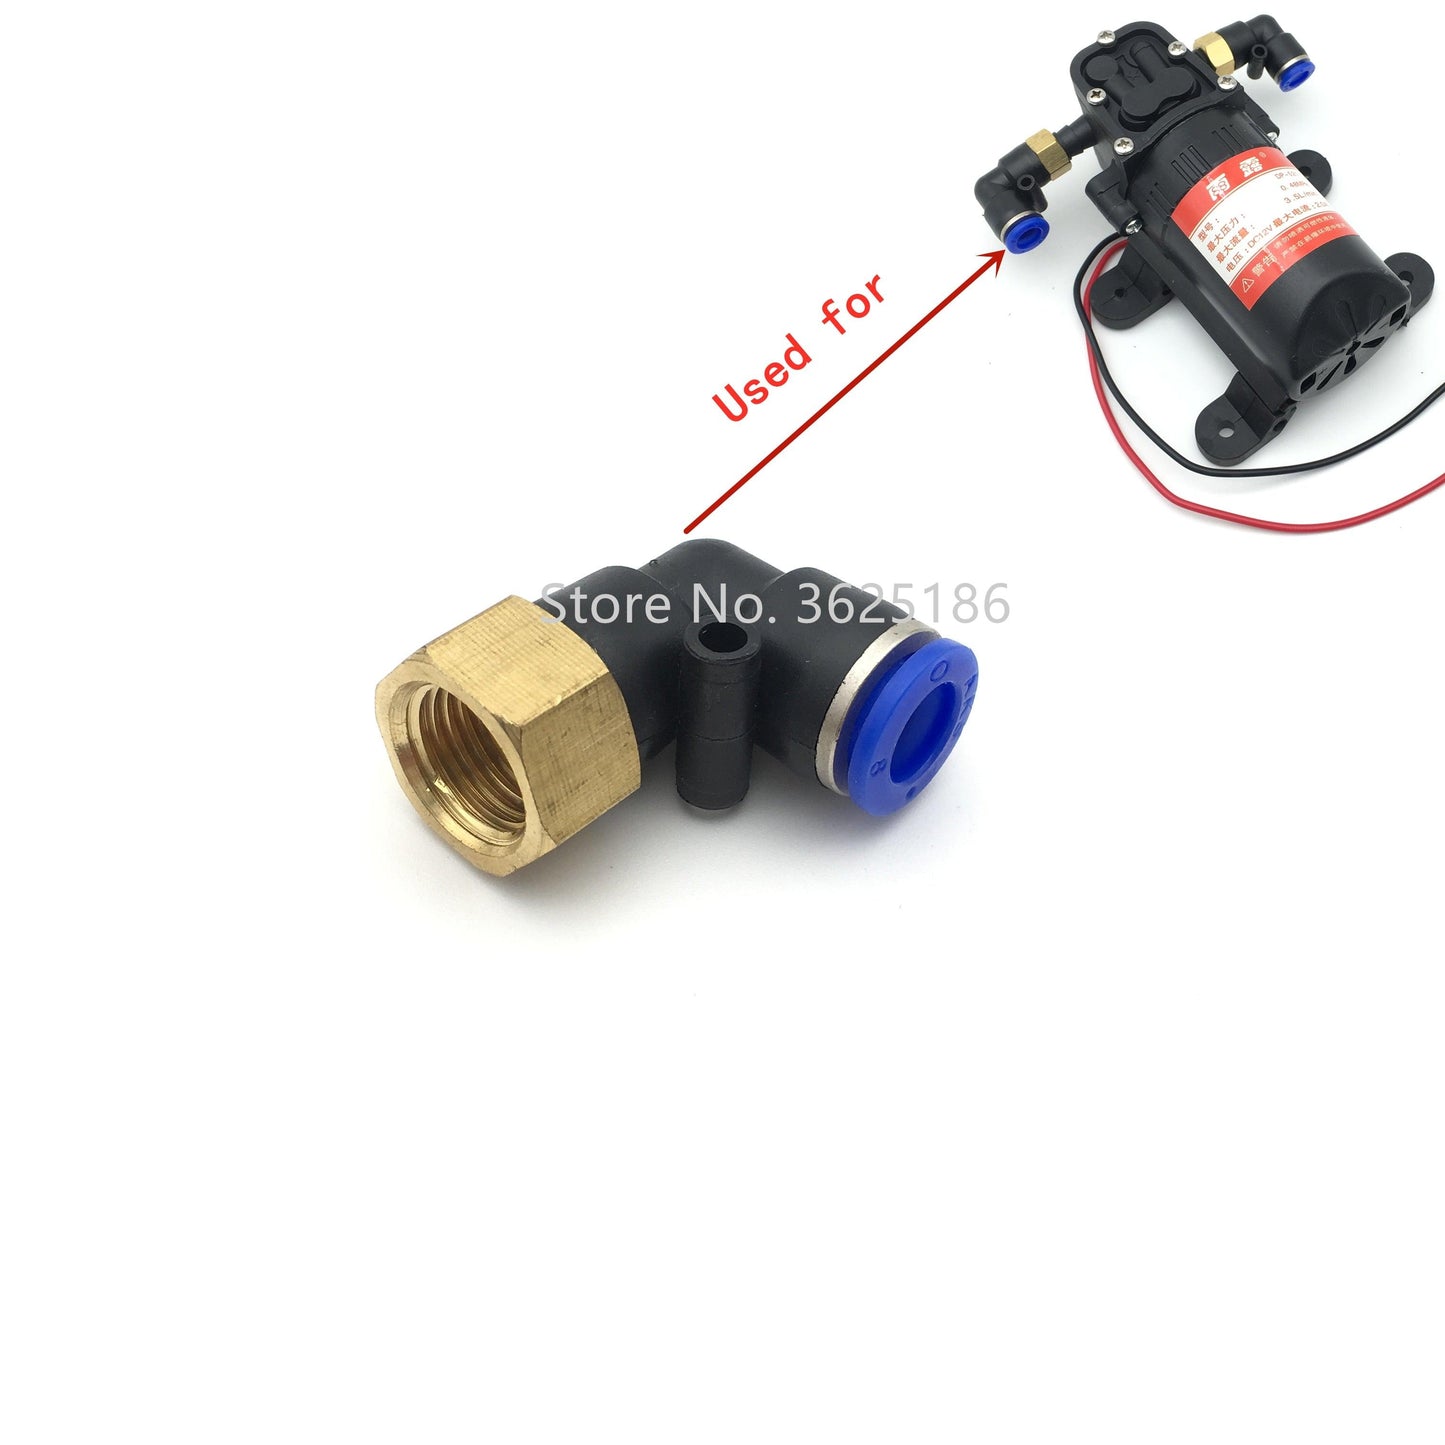 Pneumatic Connector -1pcs agricultural plant protection drone 6mm 8mm 12mm pneumatic connector/adapter/T-type tee/Y-type tee/L-type elbow Agricultural Drone Accessories - RCDrone